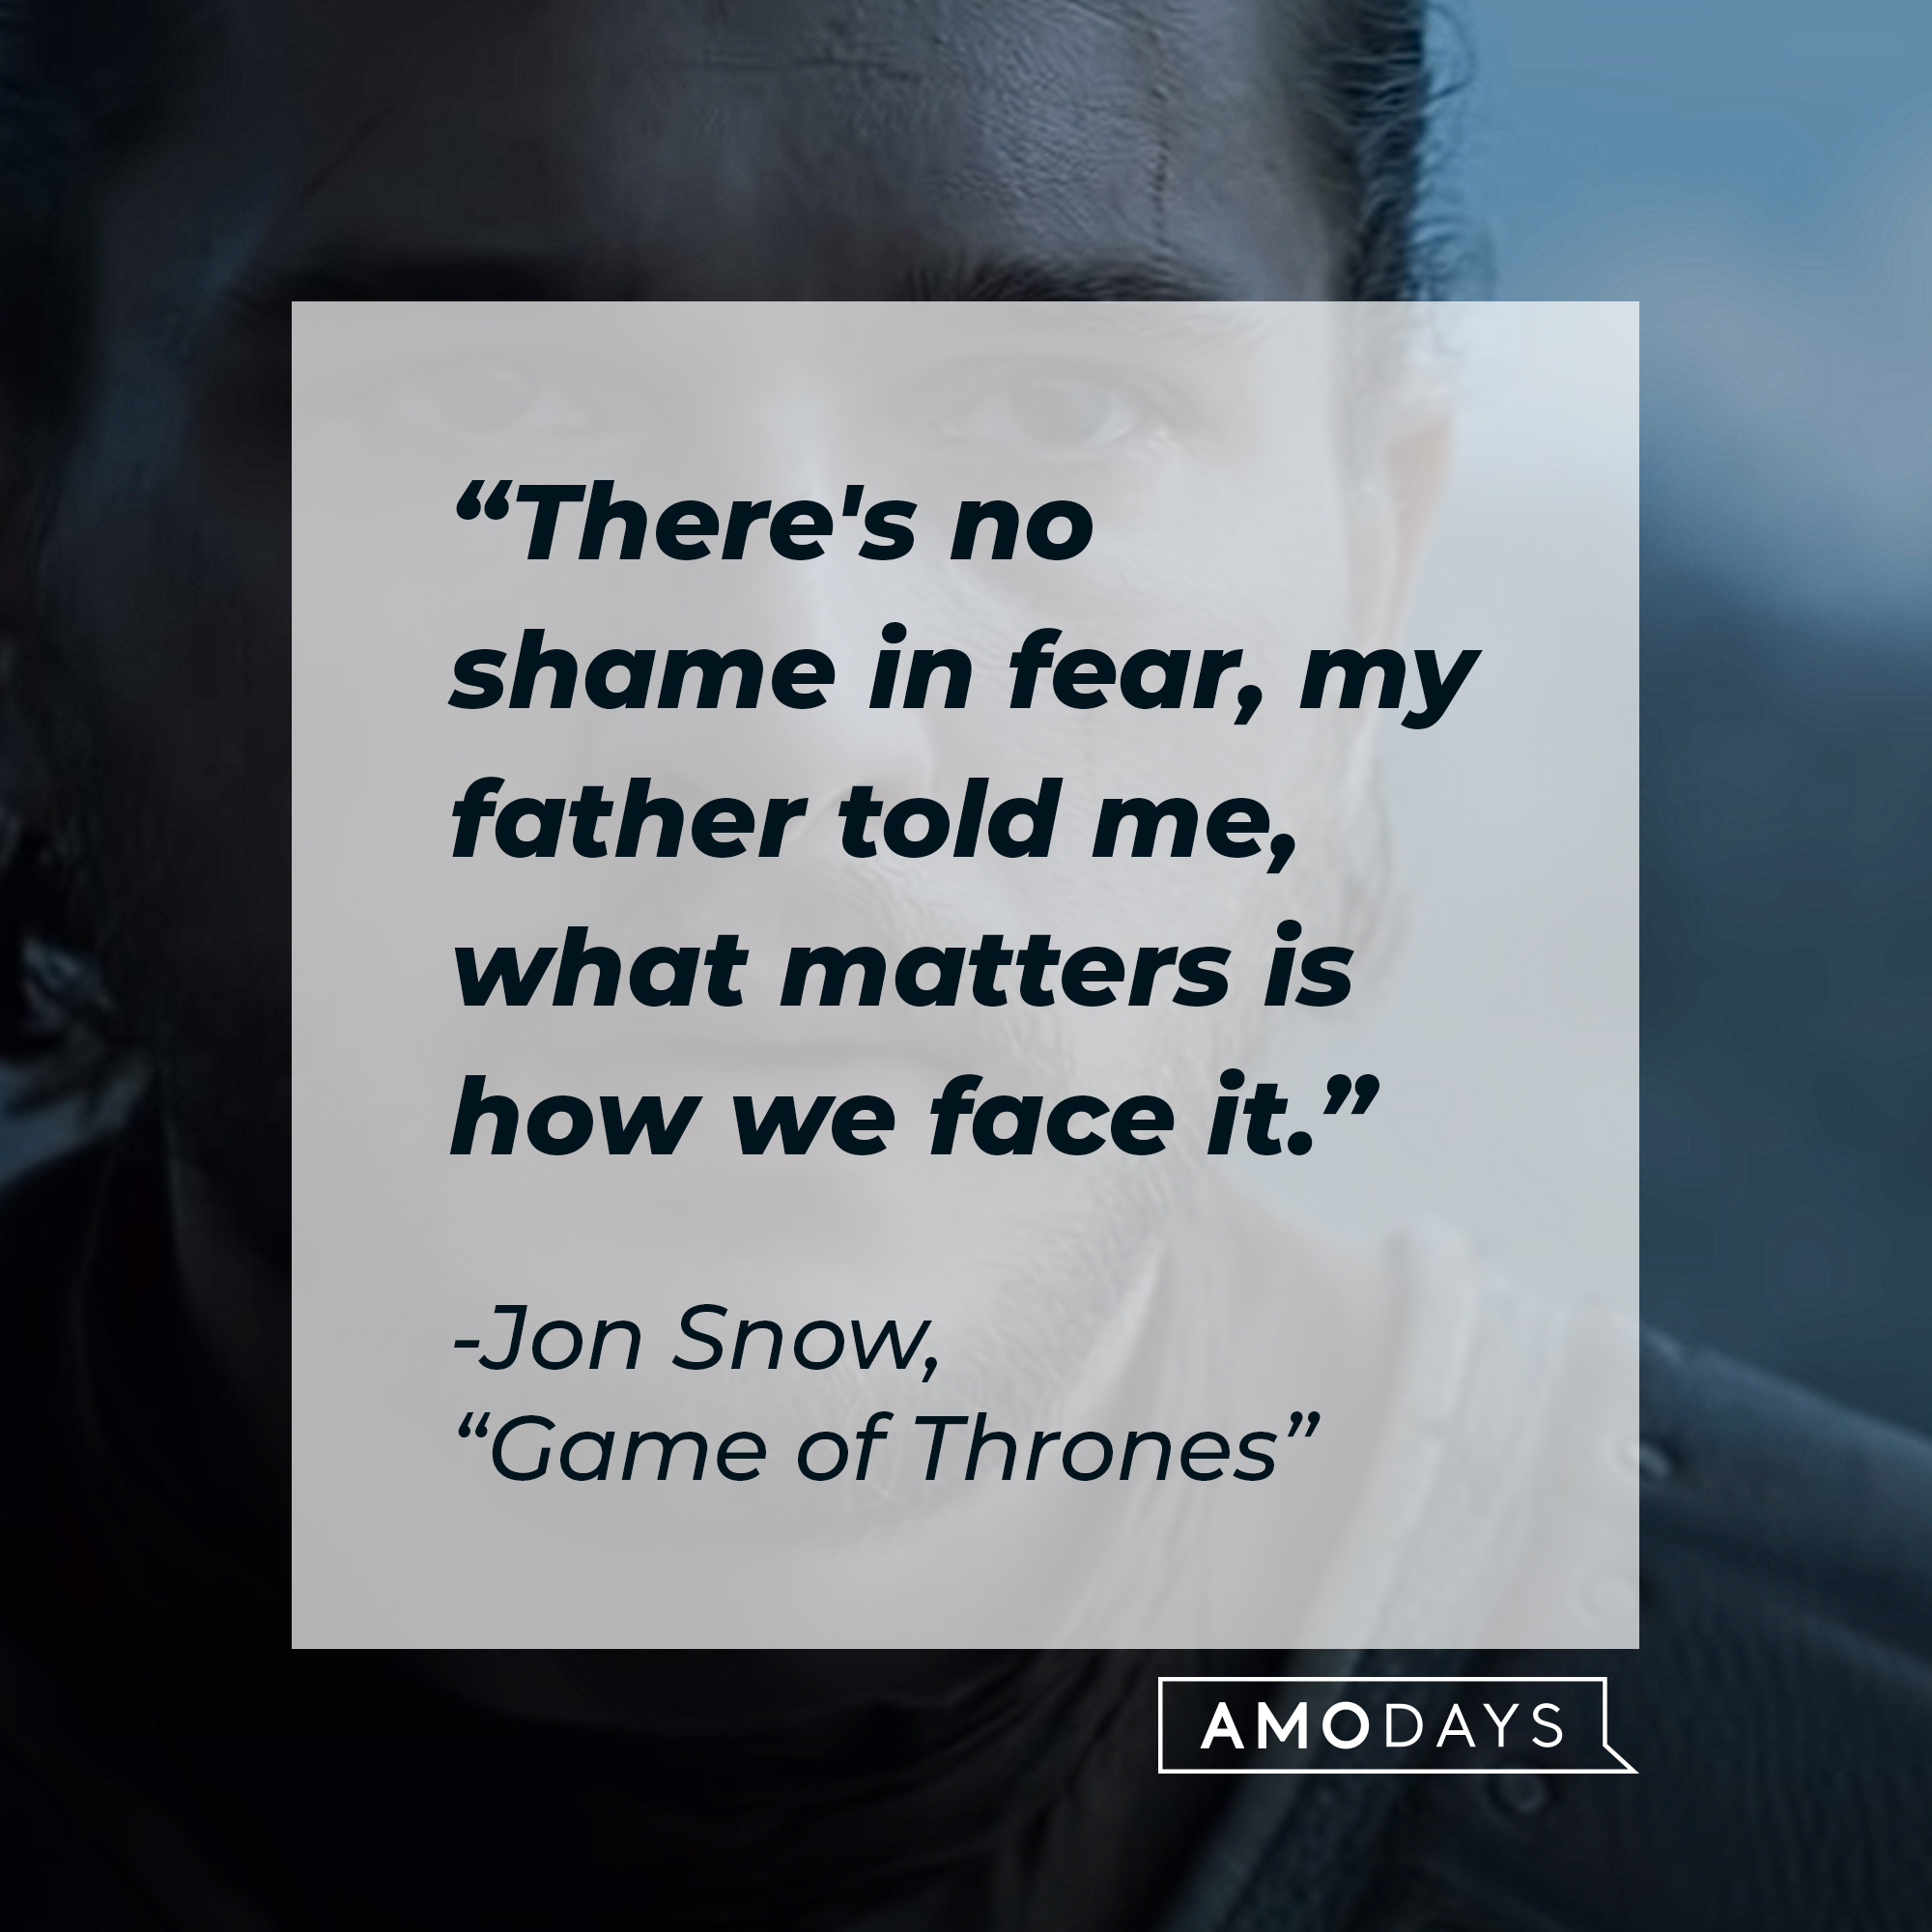 A photo of Jone Snow with the quote, "There's no shame in fear, my father told me, what matters is how we face it." | Source: YouTube/gameofthrones